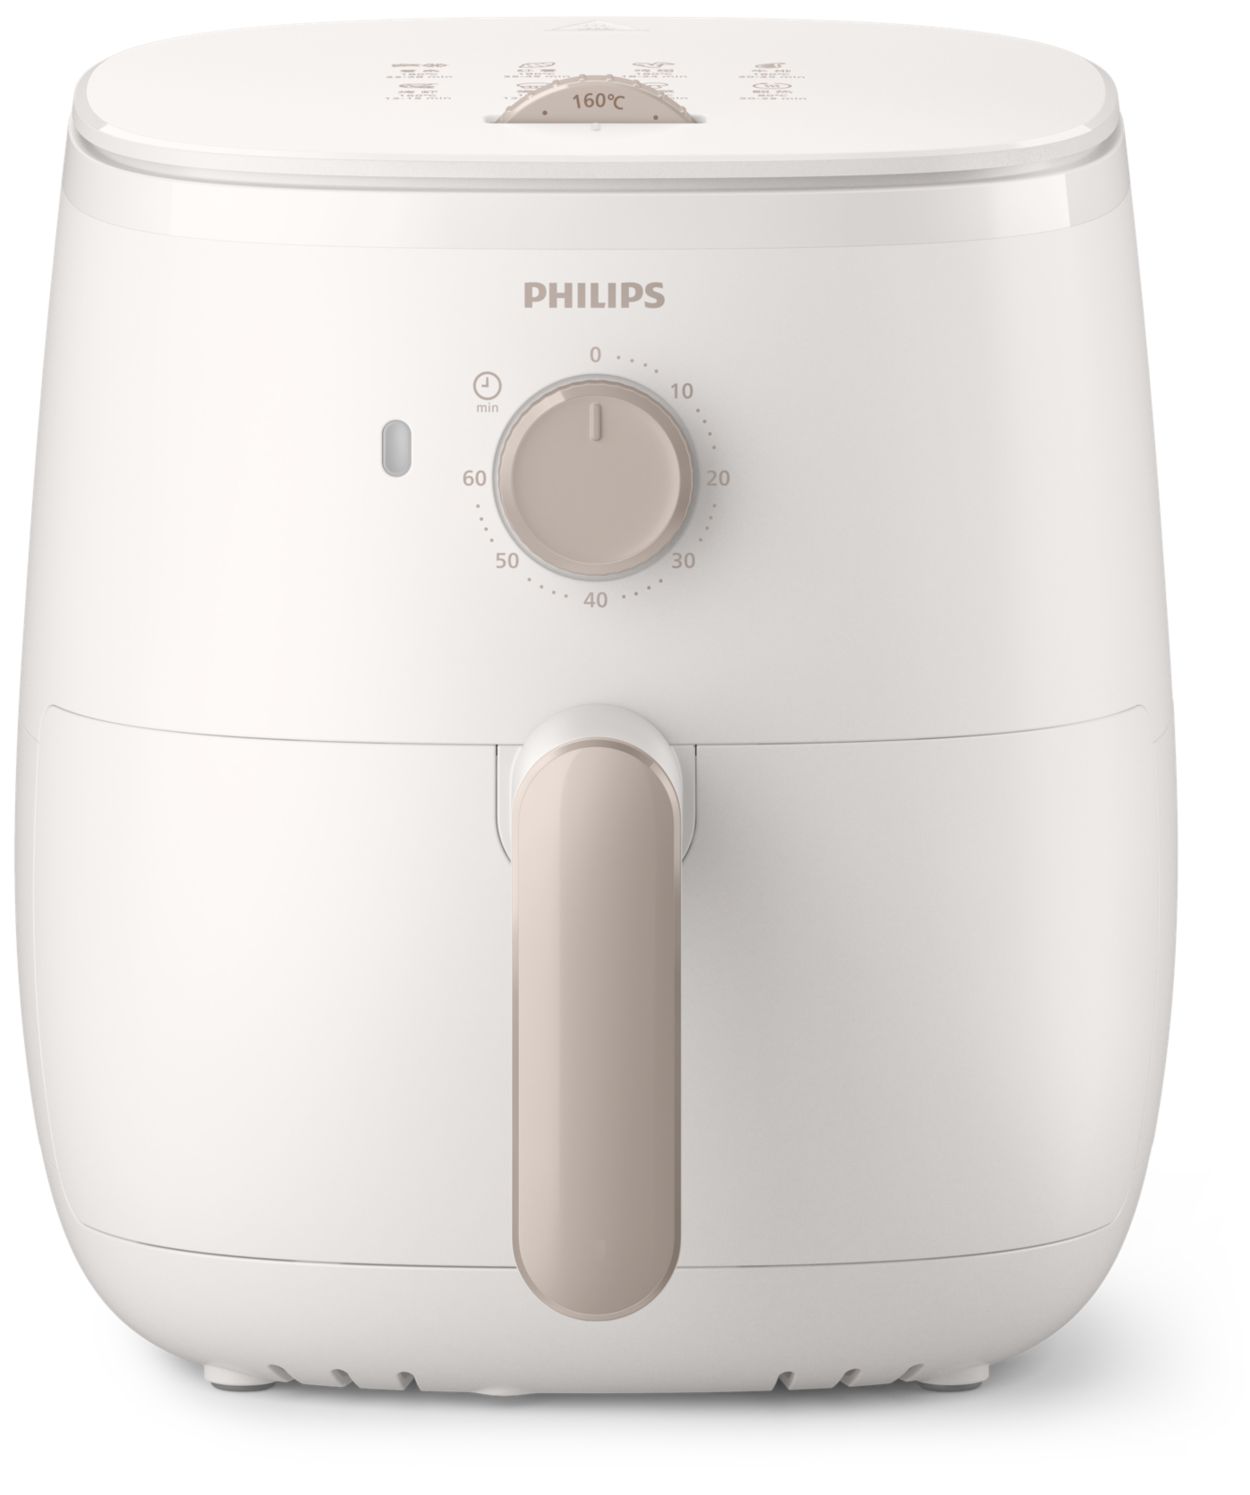 NEW MODEL ] PHILIPS 3000 Series Compact Air Fryer HD9100 (HD9100/20)  Airfryer - Rapid Air Technology, Easy to Clean Pot